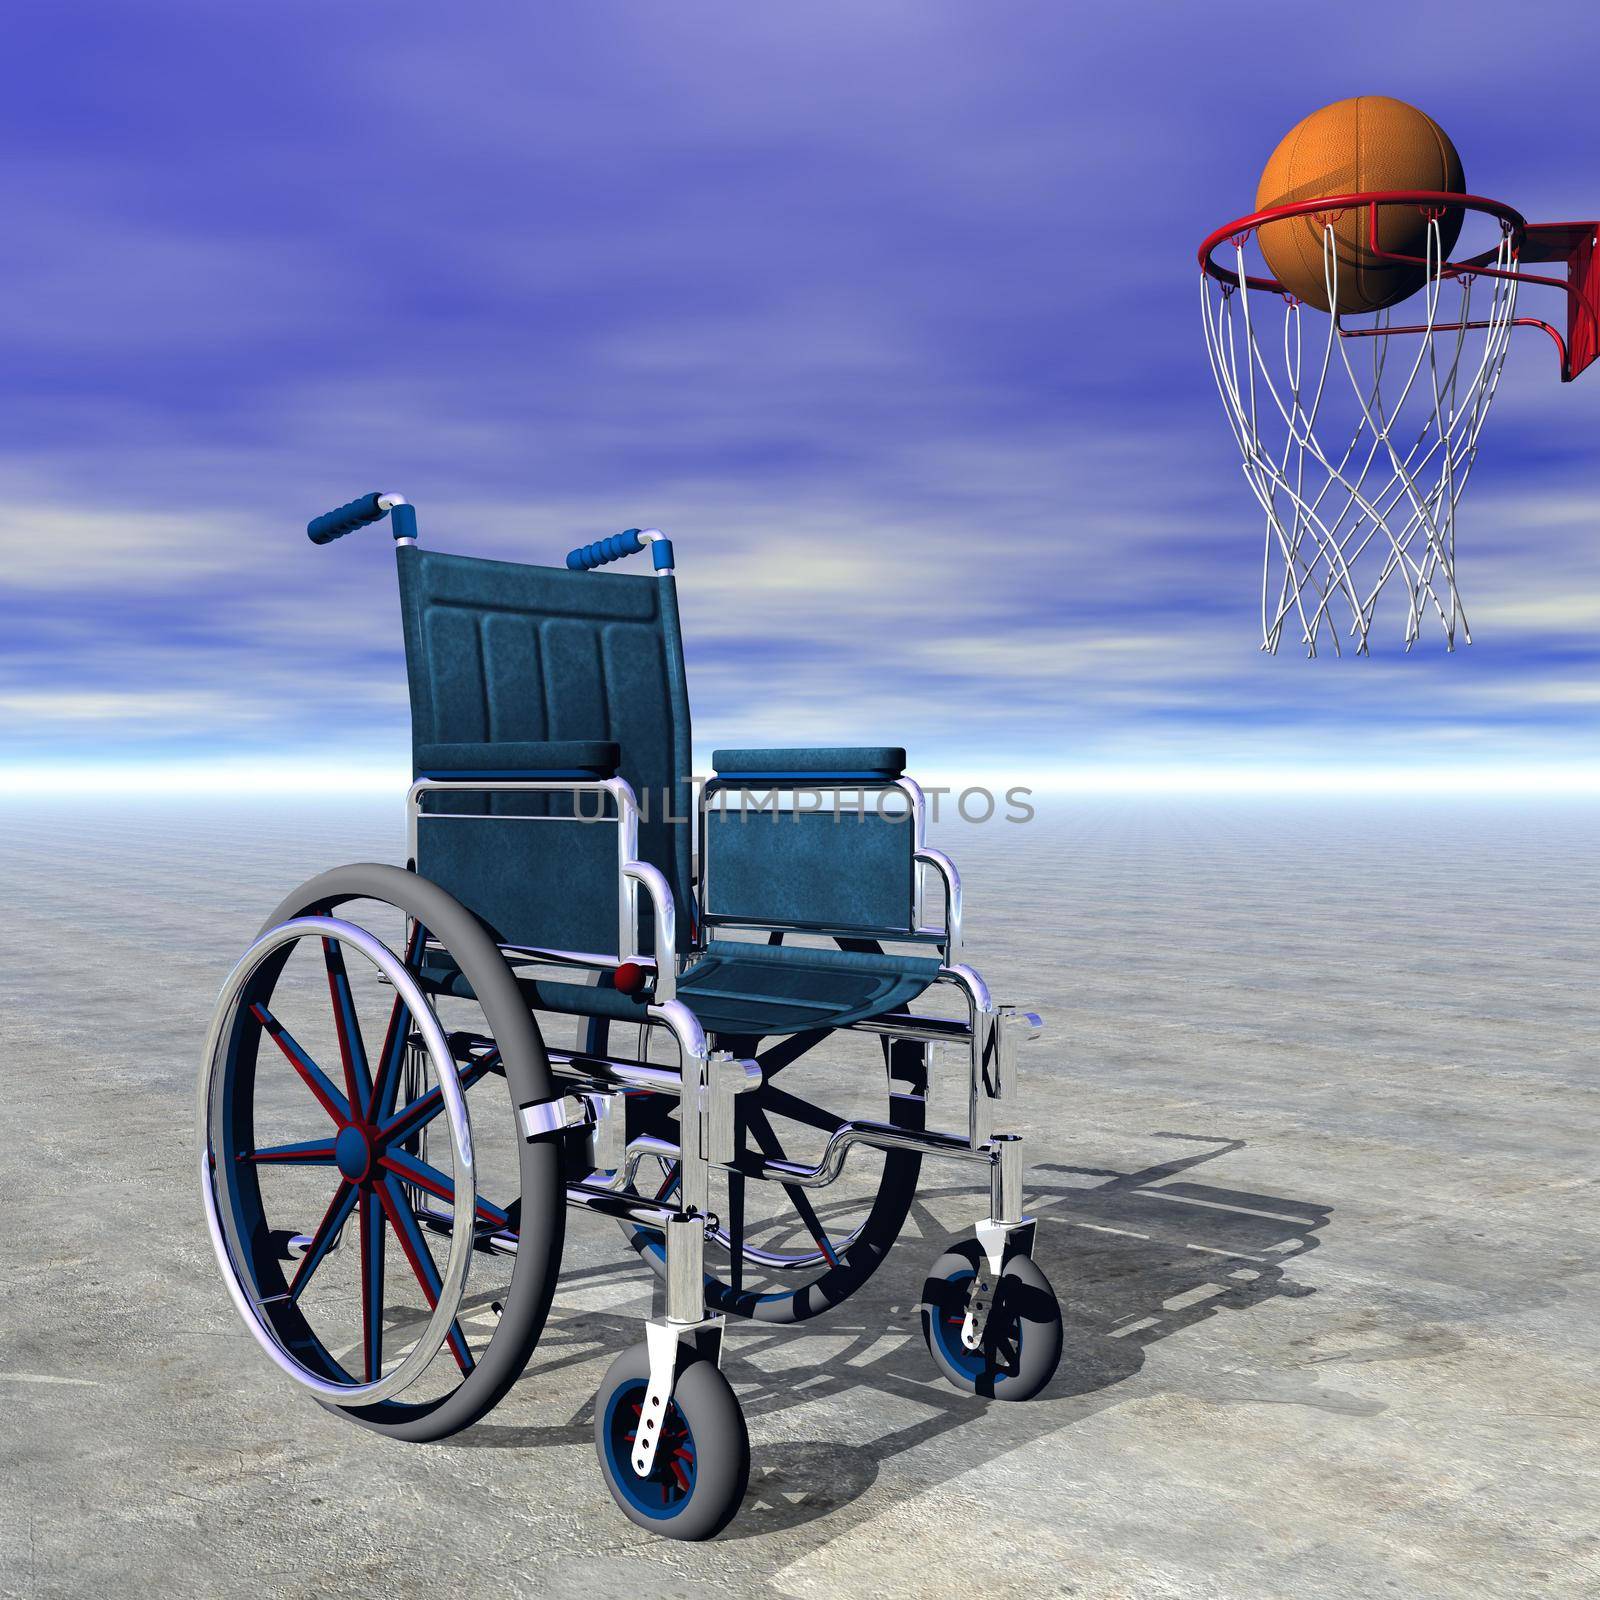 Basketball for handicapped - 3D render by Elenaphotos21